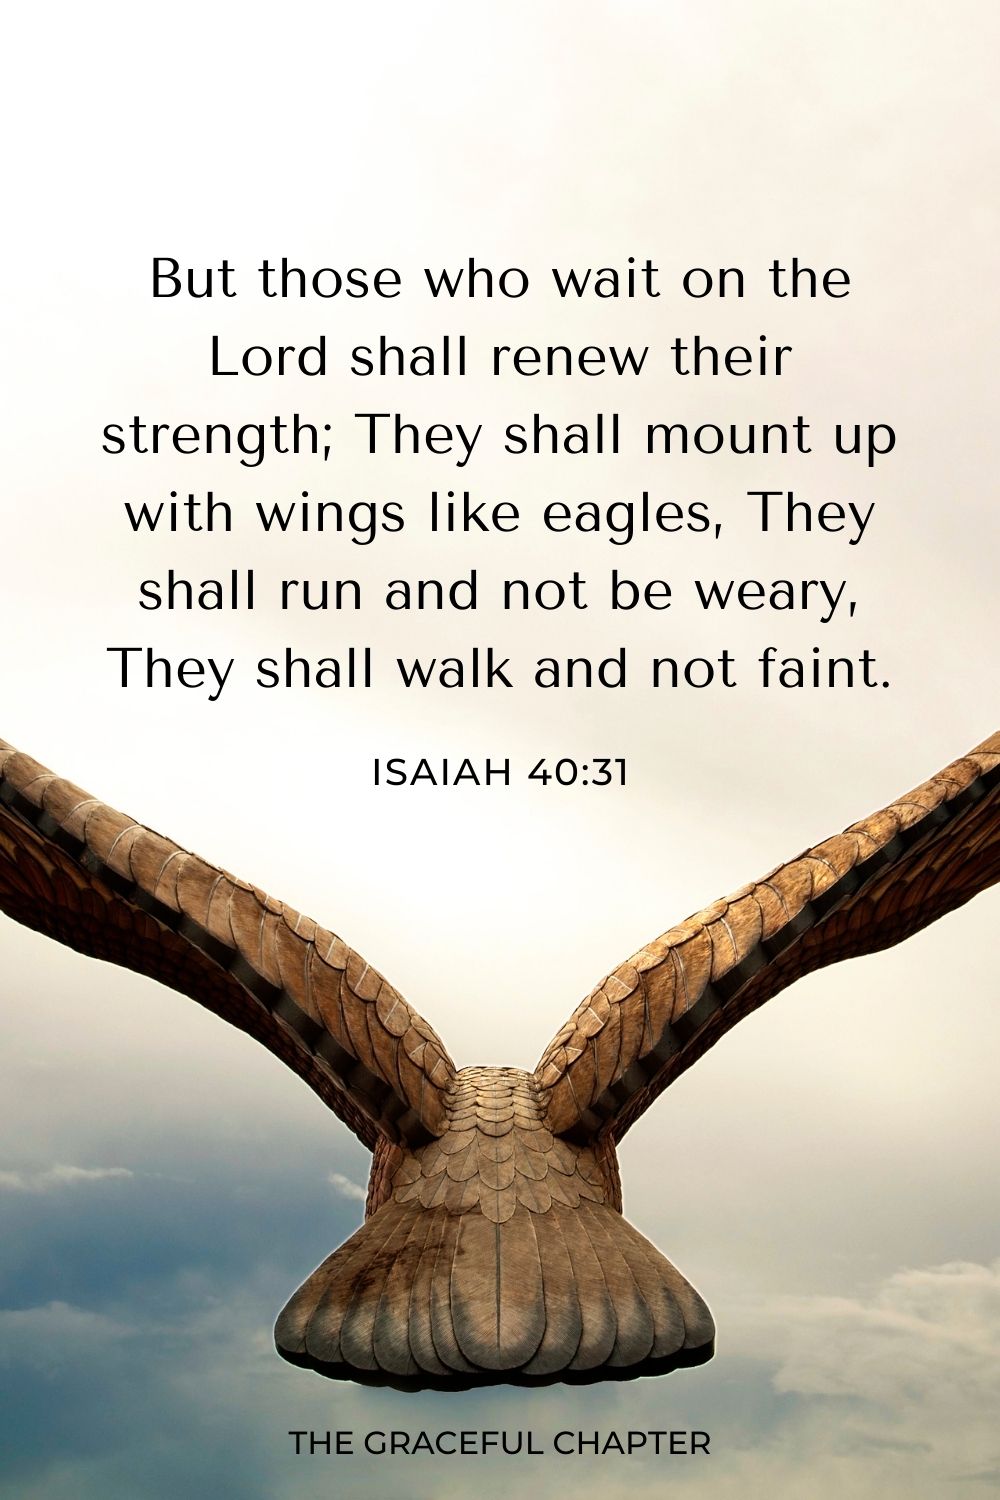 But those who wait on the Lord
Shall renew their strength;
They shall mount up with wings like eagles,
They shall run and not be weary,
They shall walk and not faint. Isaiah 40:31